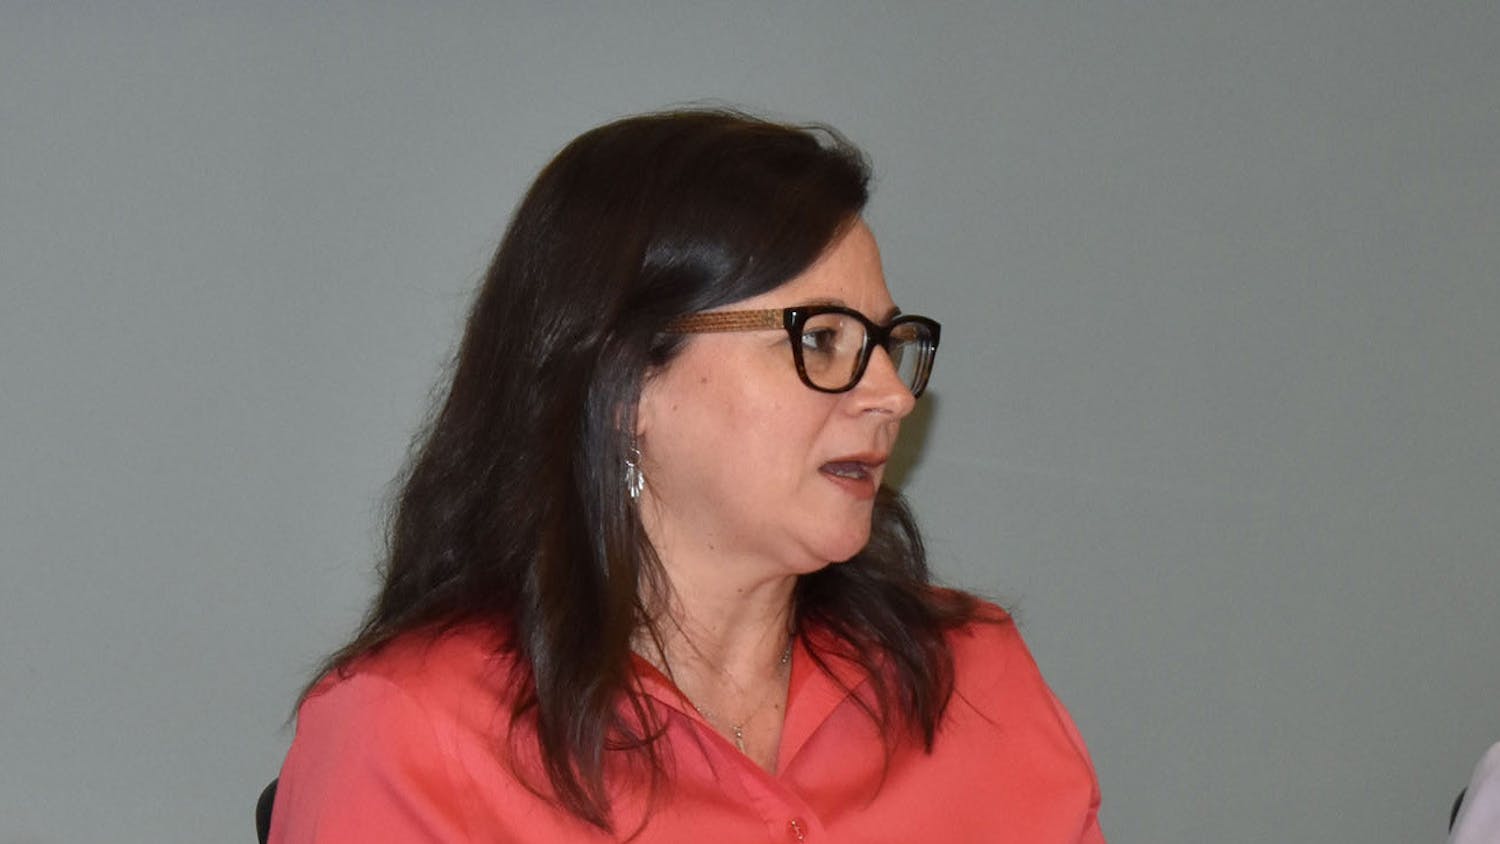 Dawn Campbell, Ed.D., discusses her perspective on women in the workforce at the Career Center of Thomas Cooper Library on March 30, 2023. Campbell is the undergraduate director of the Department of Women's and Gender Studies at USC.&nbsp;